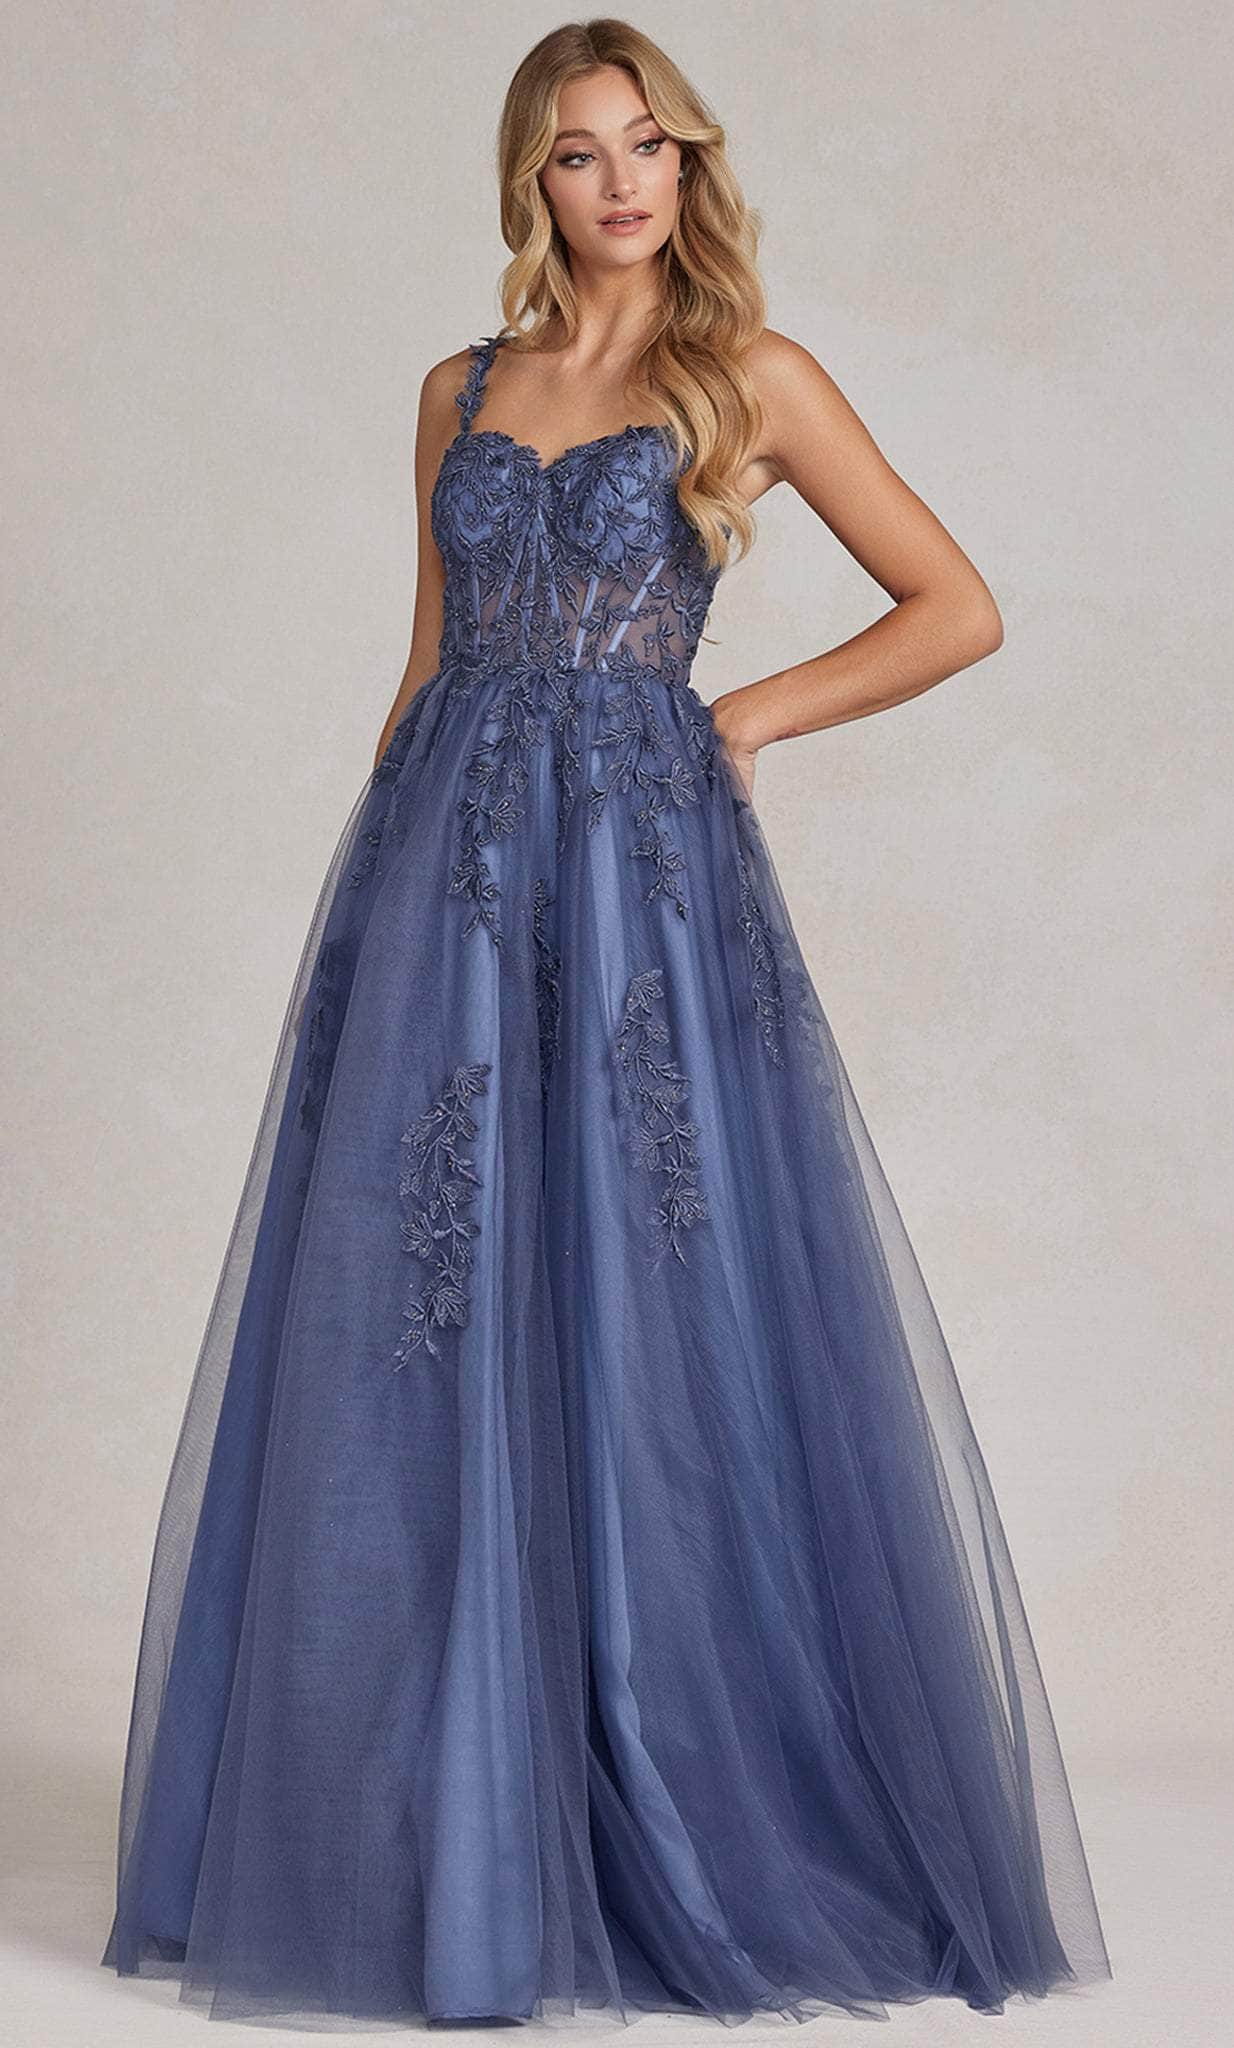 Image of Nox Anabel T1082 - Sweetheart Corset Prom Gown